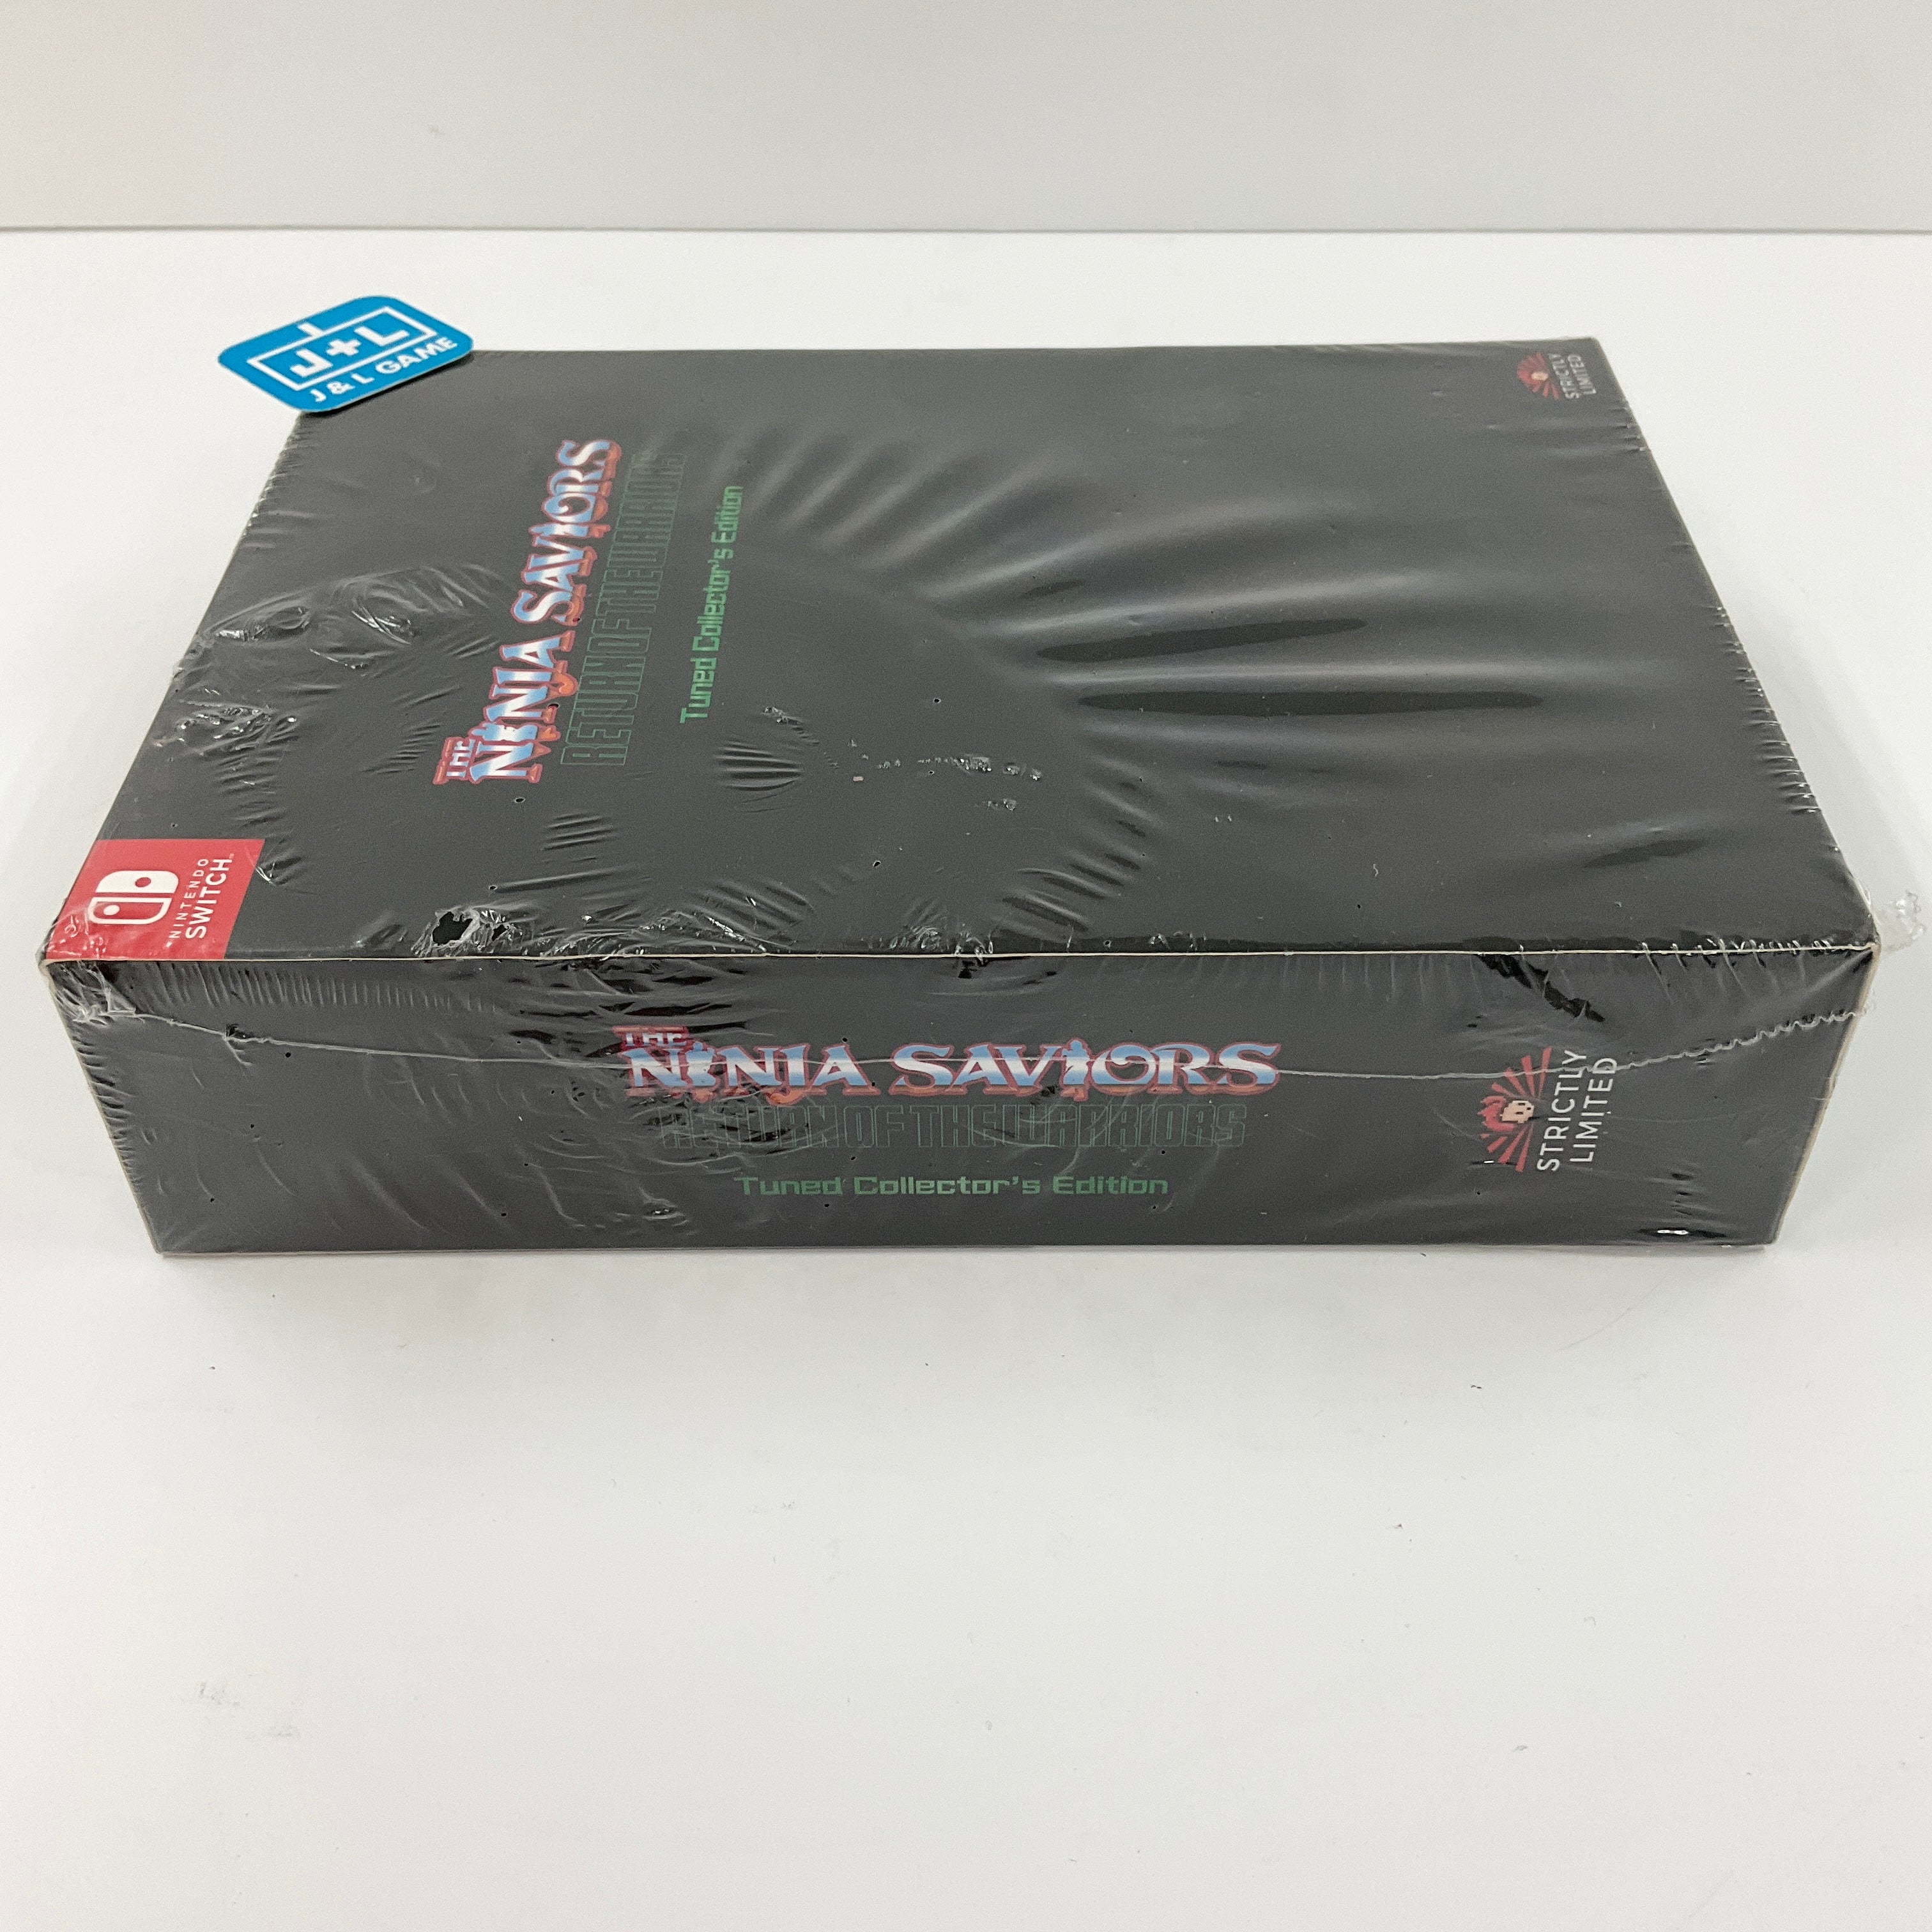 The Ninja Saviors Return of the Warriors (Tuned Collector's Edition) - (NSW) Nintendo Switch Video Games Strictly Limited   